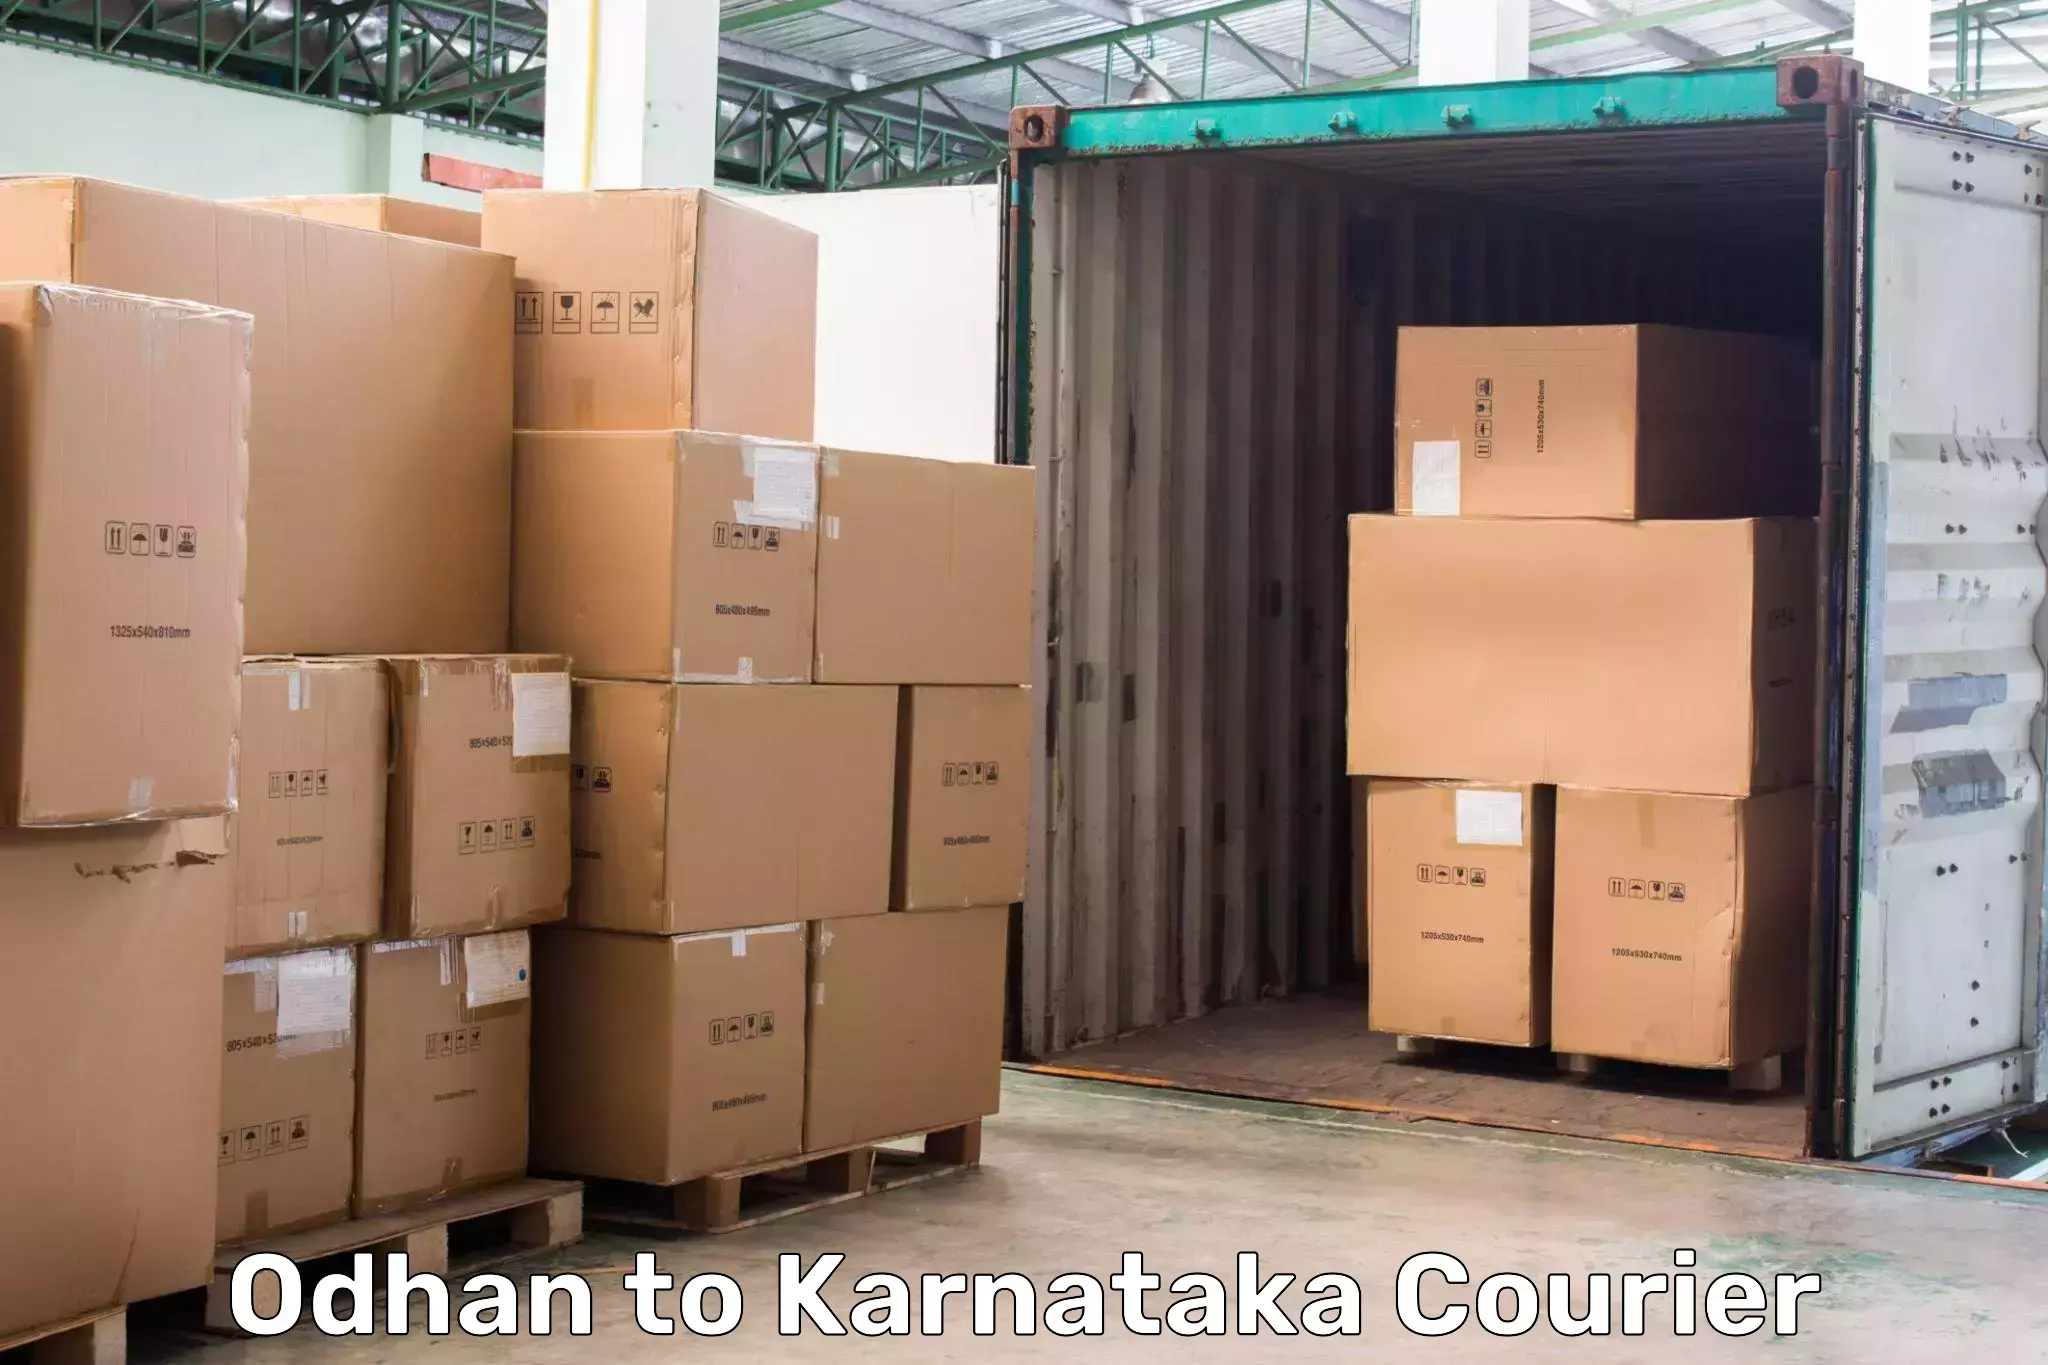 Reliable parcel services in Odhan to Karnataka